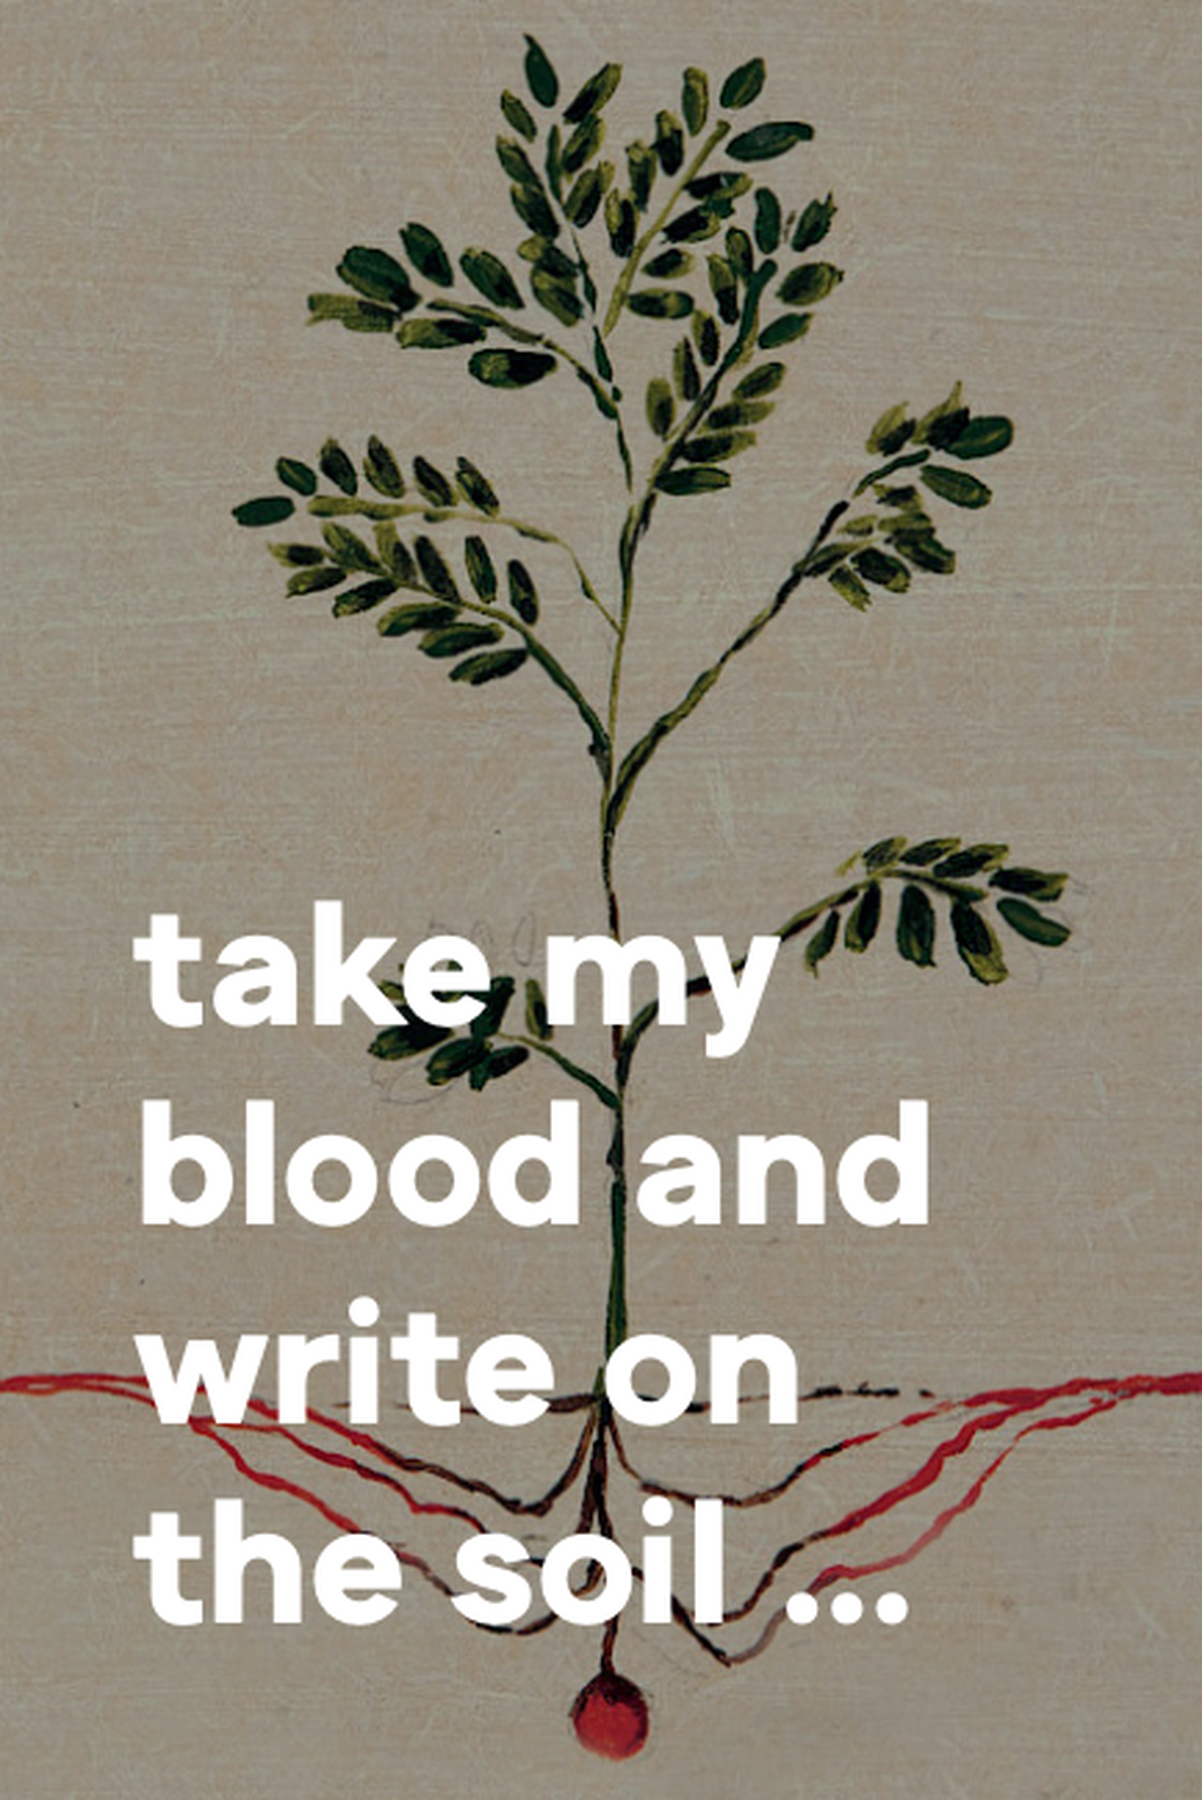 Take my blood and write on the soil …